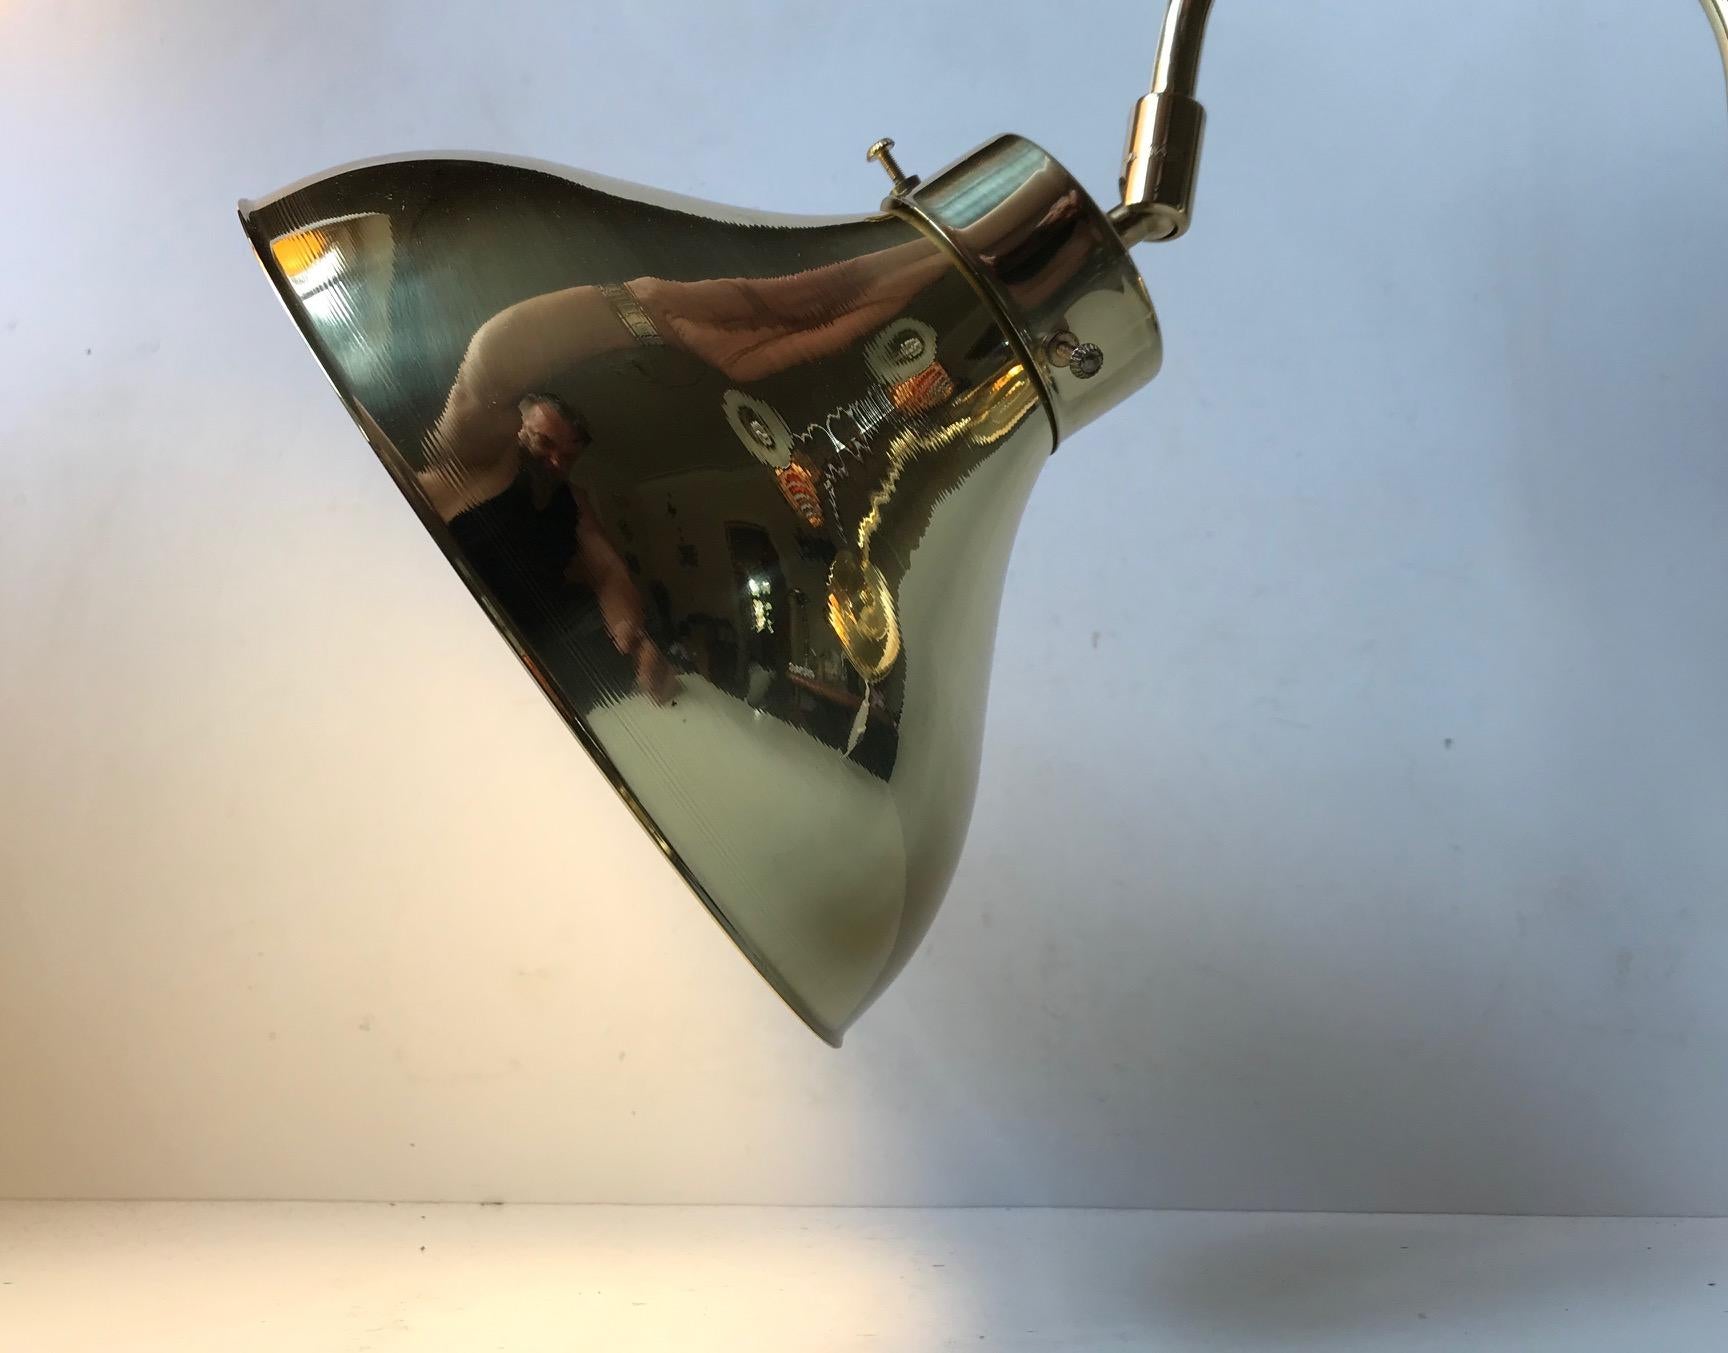 Fully adjustable brass wall light - sconce manufactured and designed by Abo Metalkunst in a style reminiscent of Hans Agne Jakobsson. The condition is NOS (new old stock) and it has never been installed nor used. It has an on/off switch to the cord